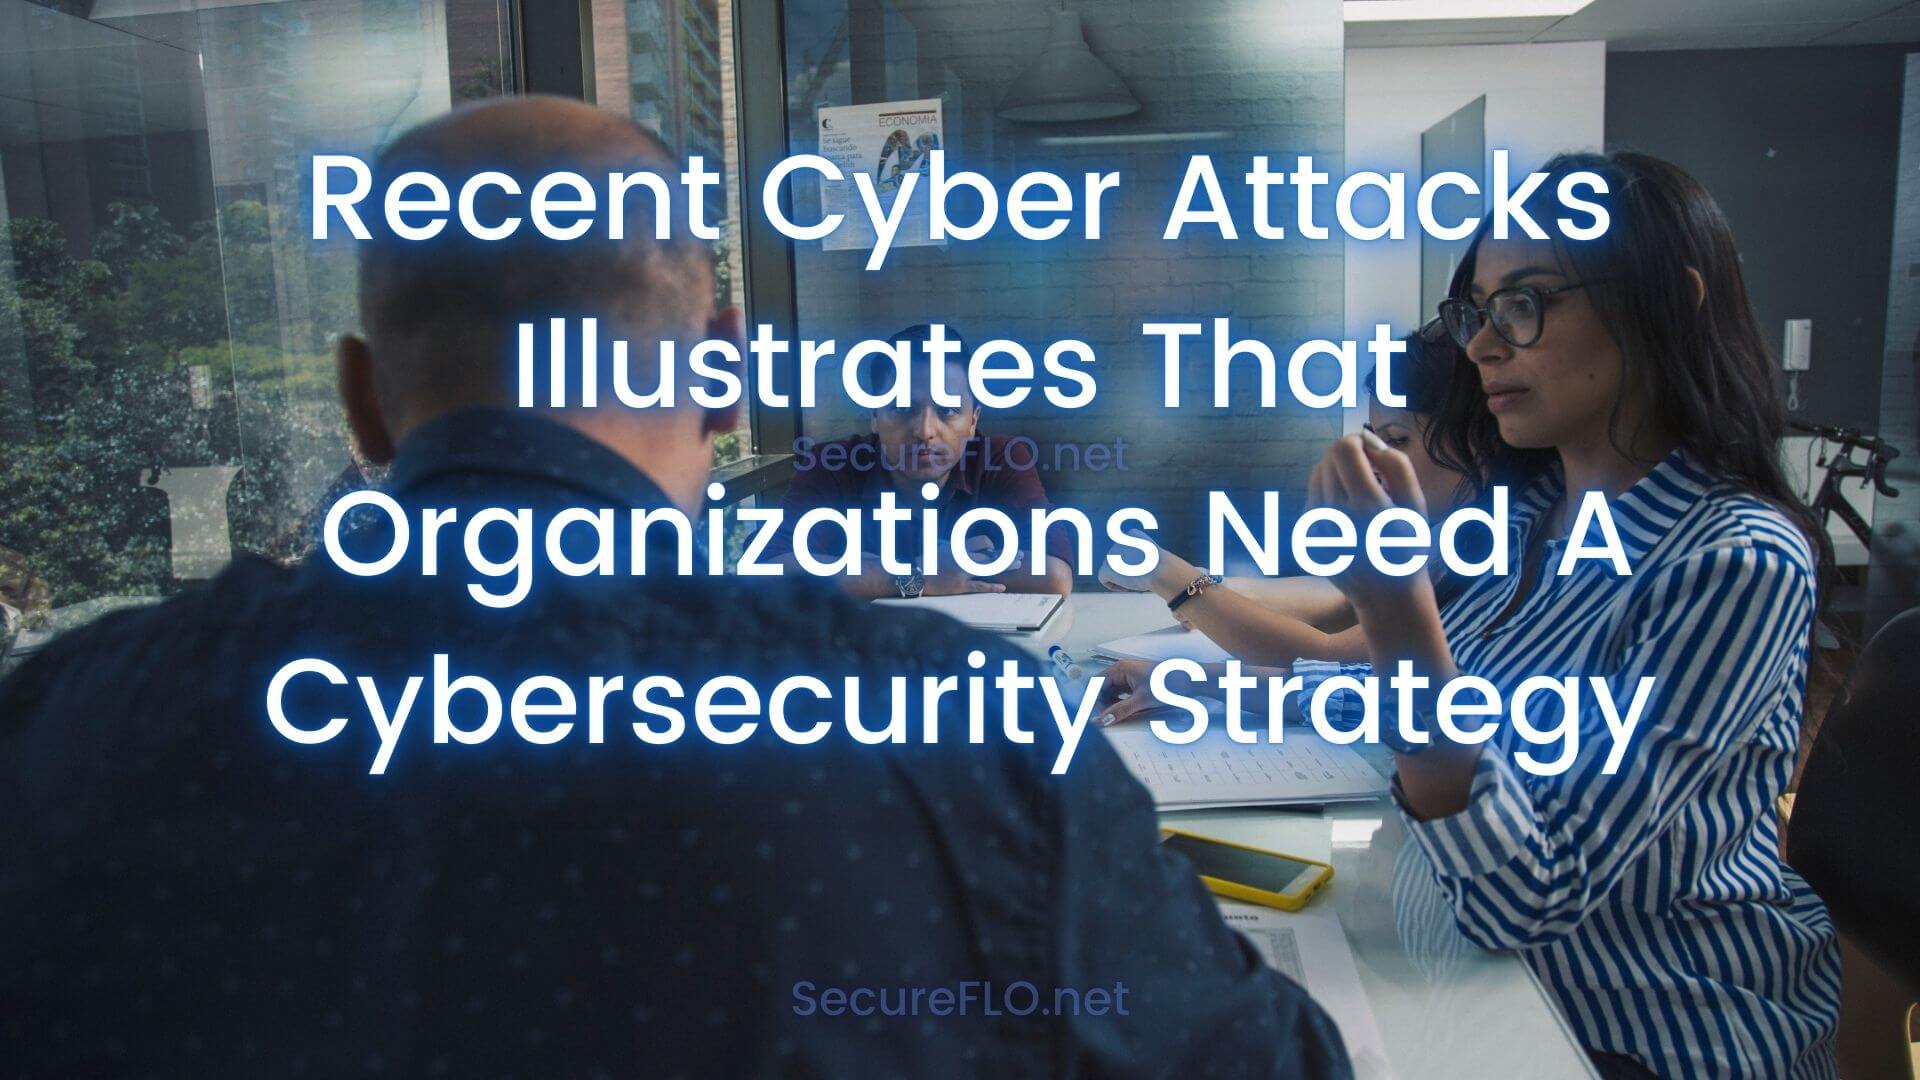 Recent Cyber Attacks Illustrates That Organizations Need A Cybersecurity Strategy secureflo.net